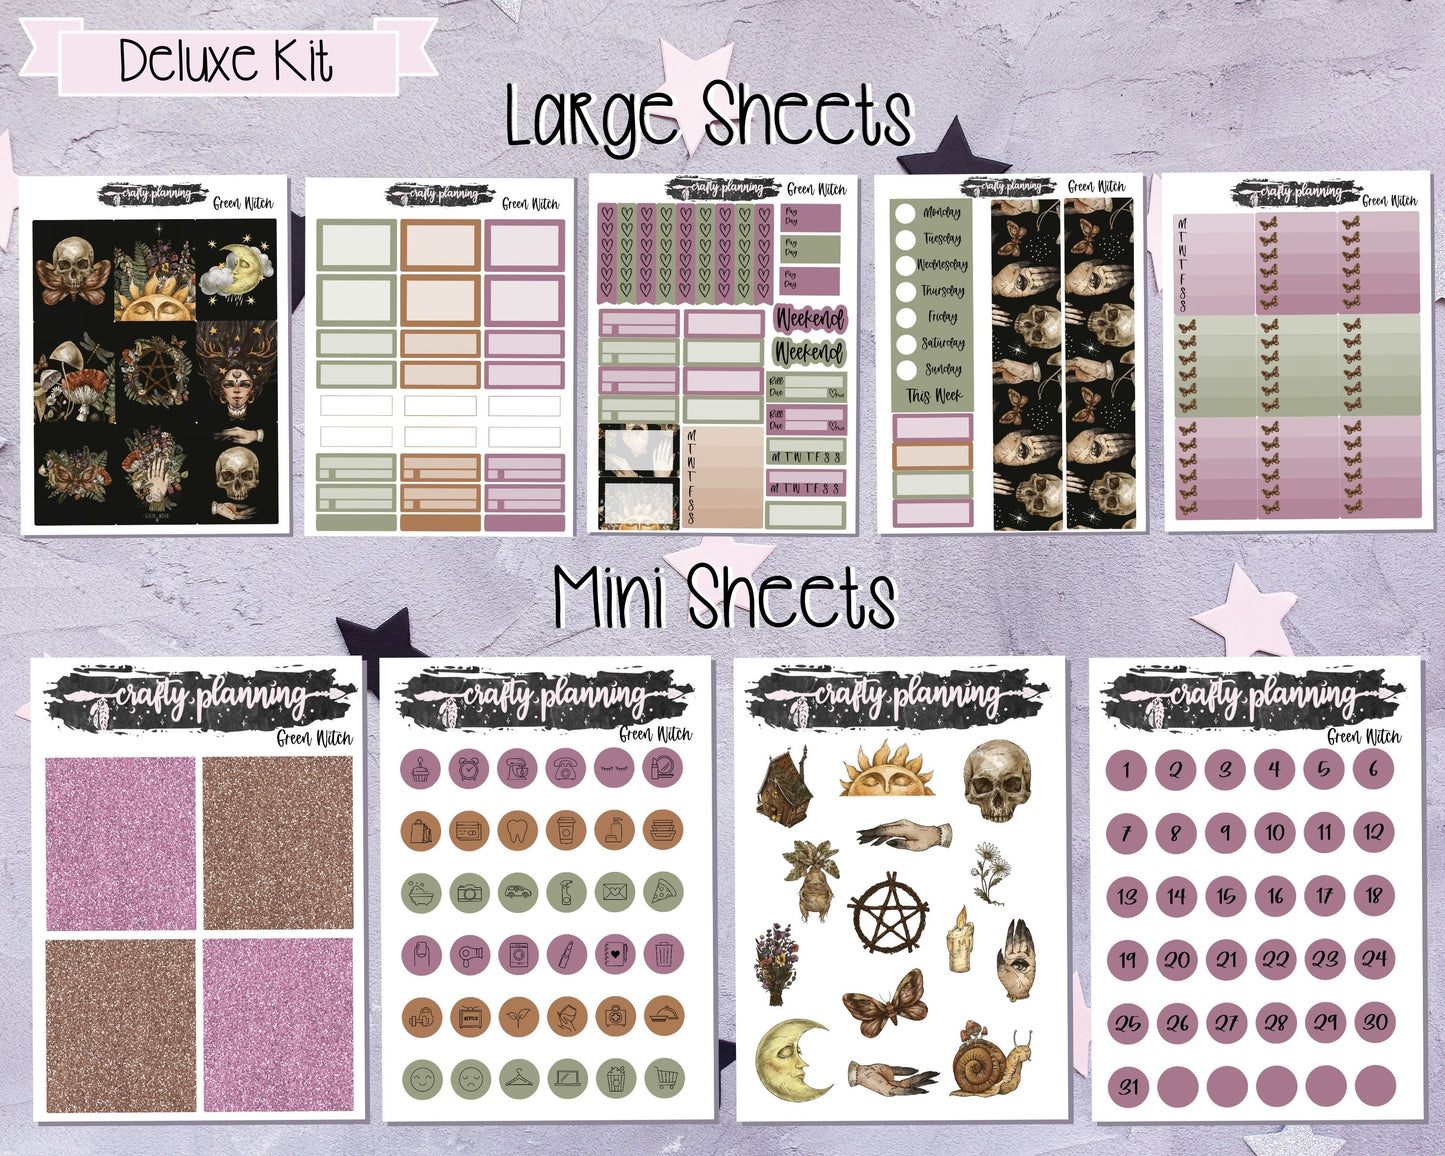 Green Witch Weekly Planner Kit, Standard Vertical, Witchcraft Stickers, Occult Stickers, A La Carte Kit, Deluxe Planner Kit